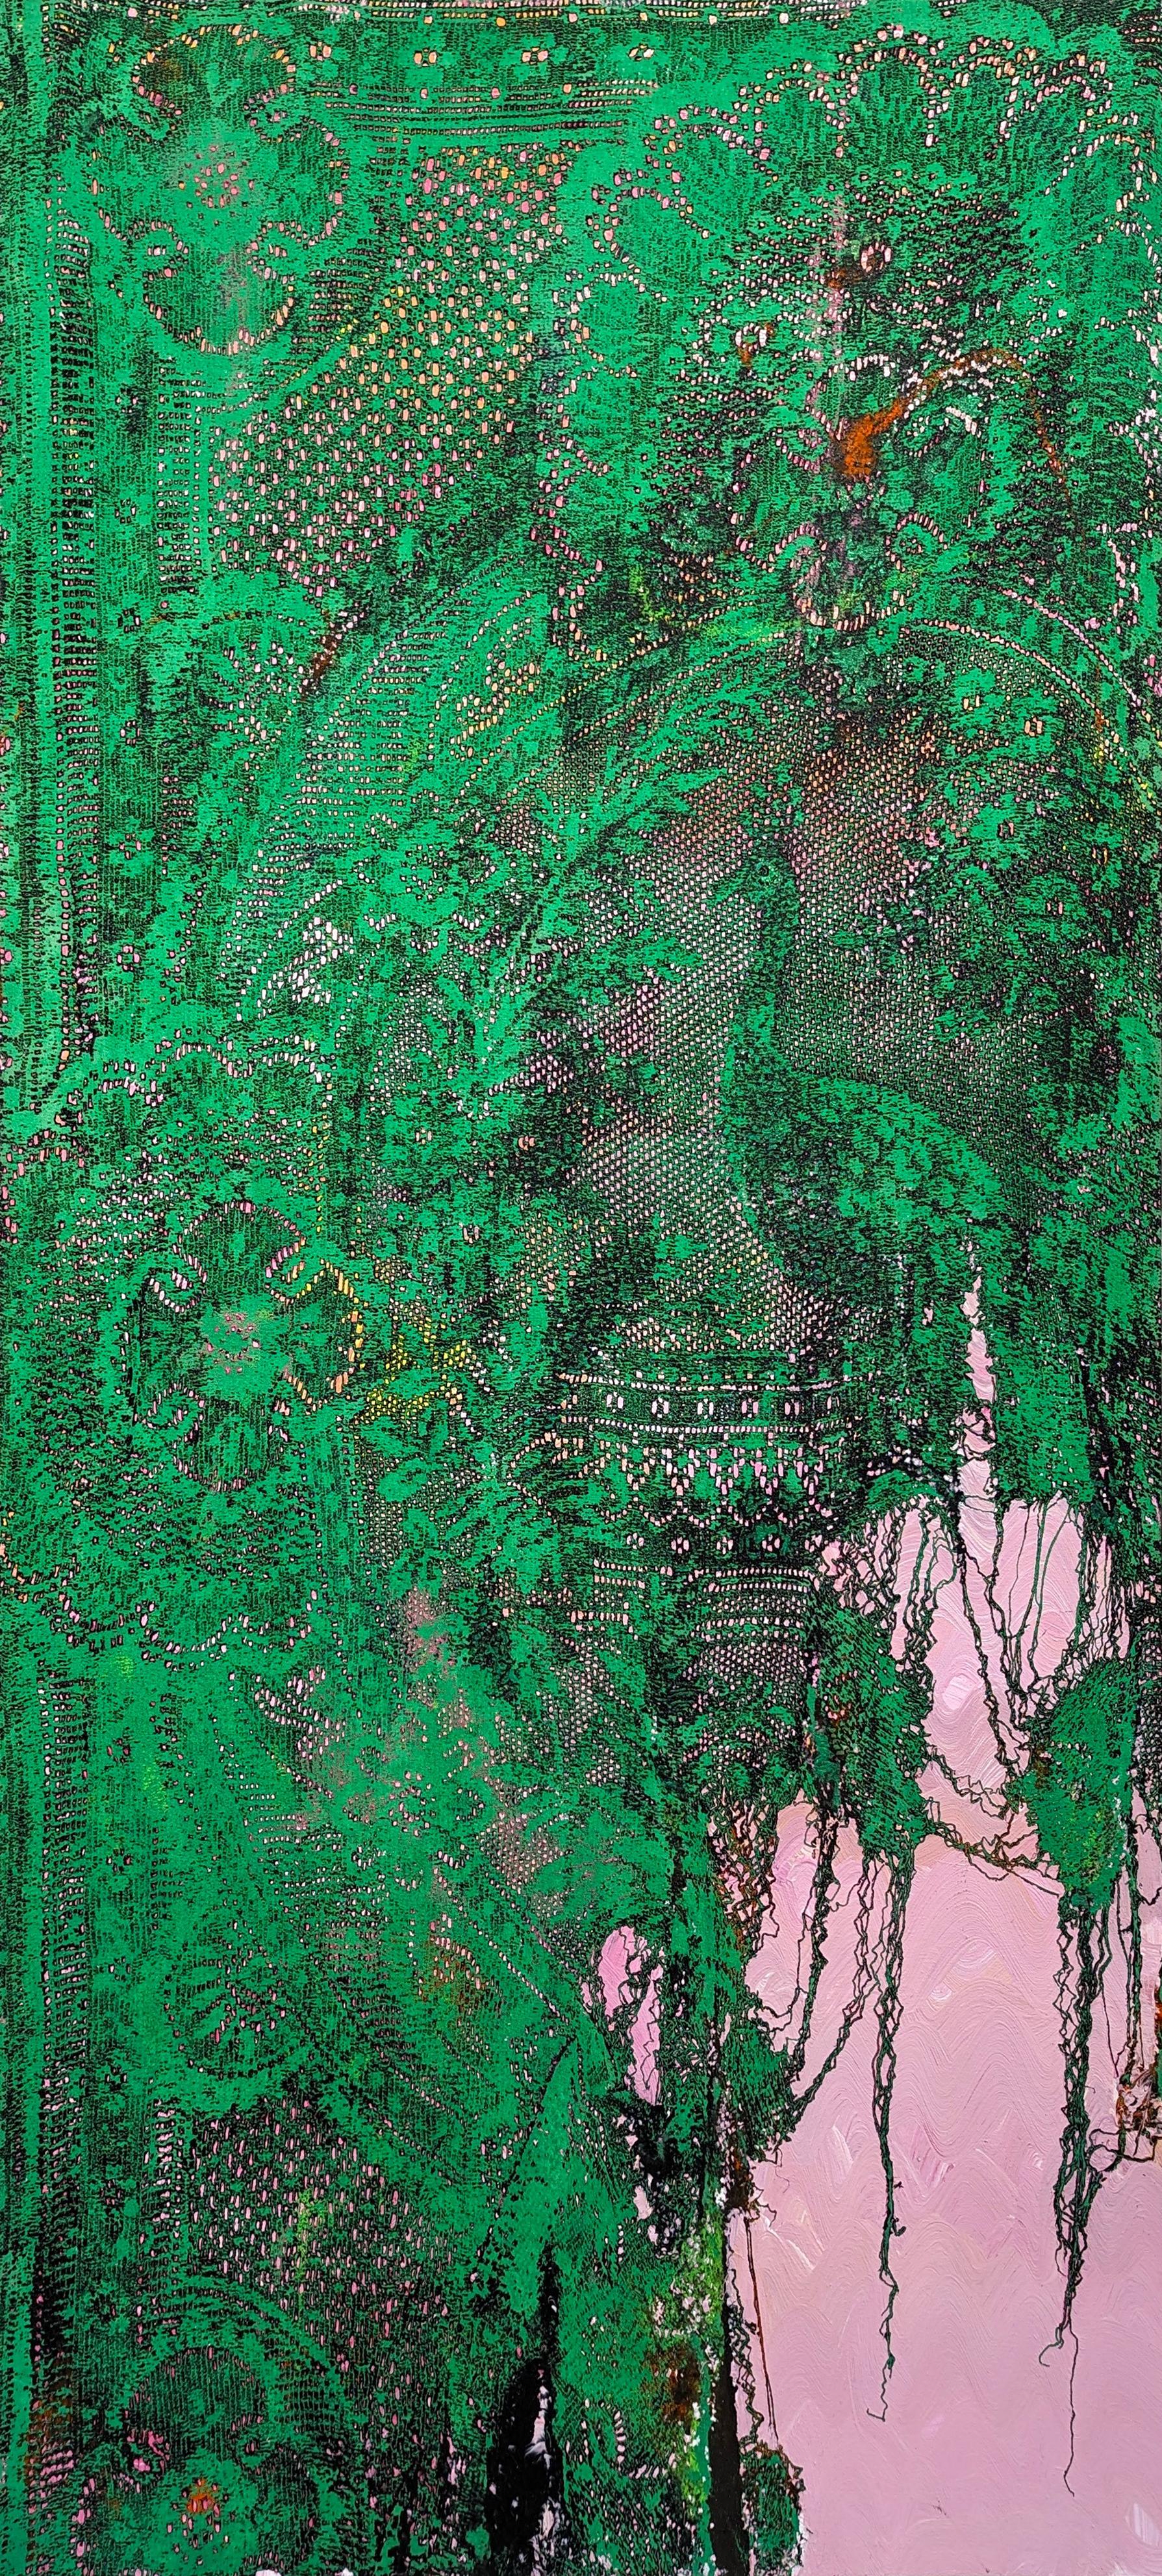 Mark Flood Abstract Painting - “Green Peacock” Contemporary Green & Pink Abstract Lace Painting